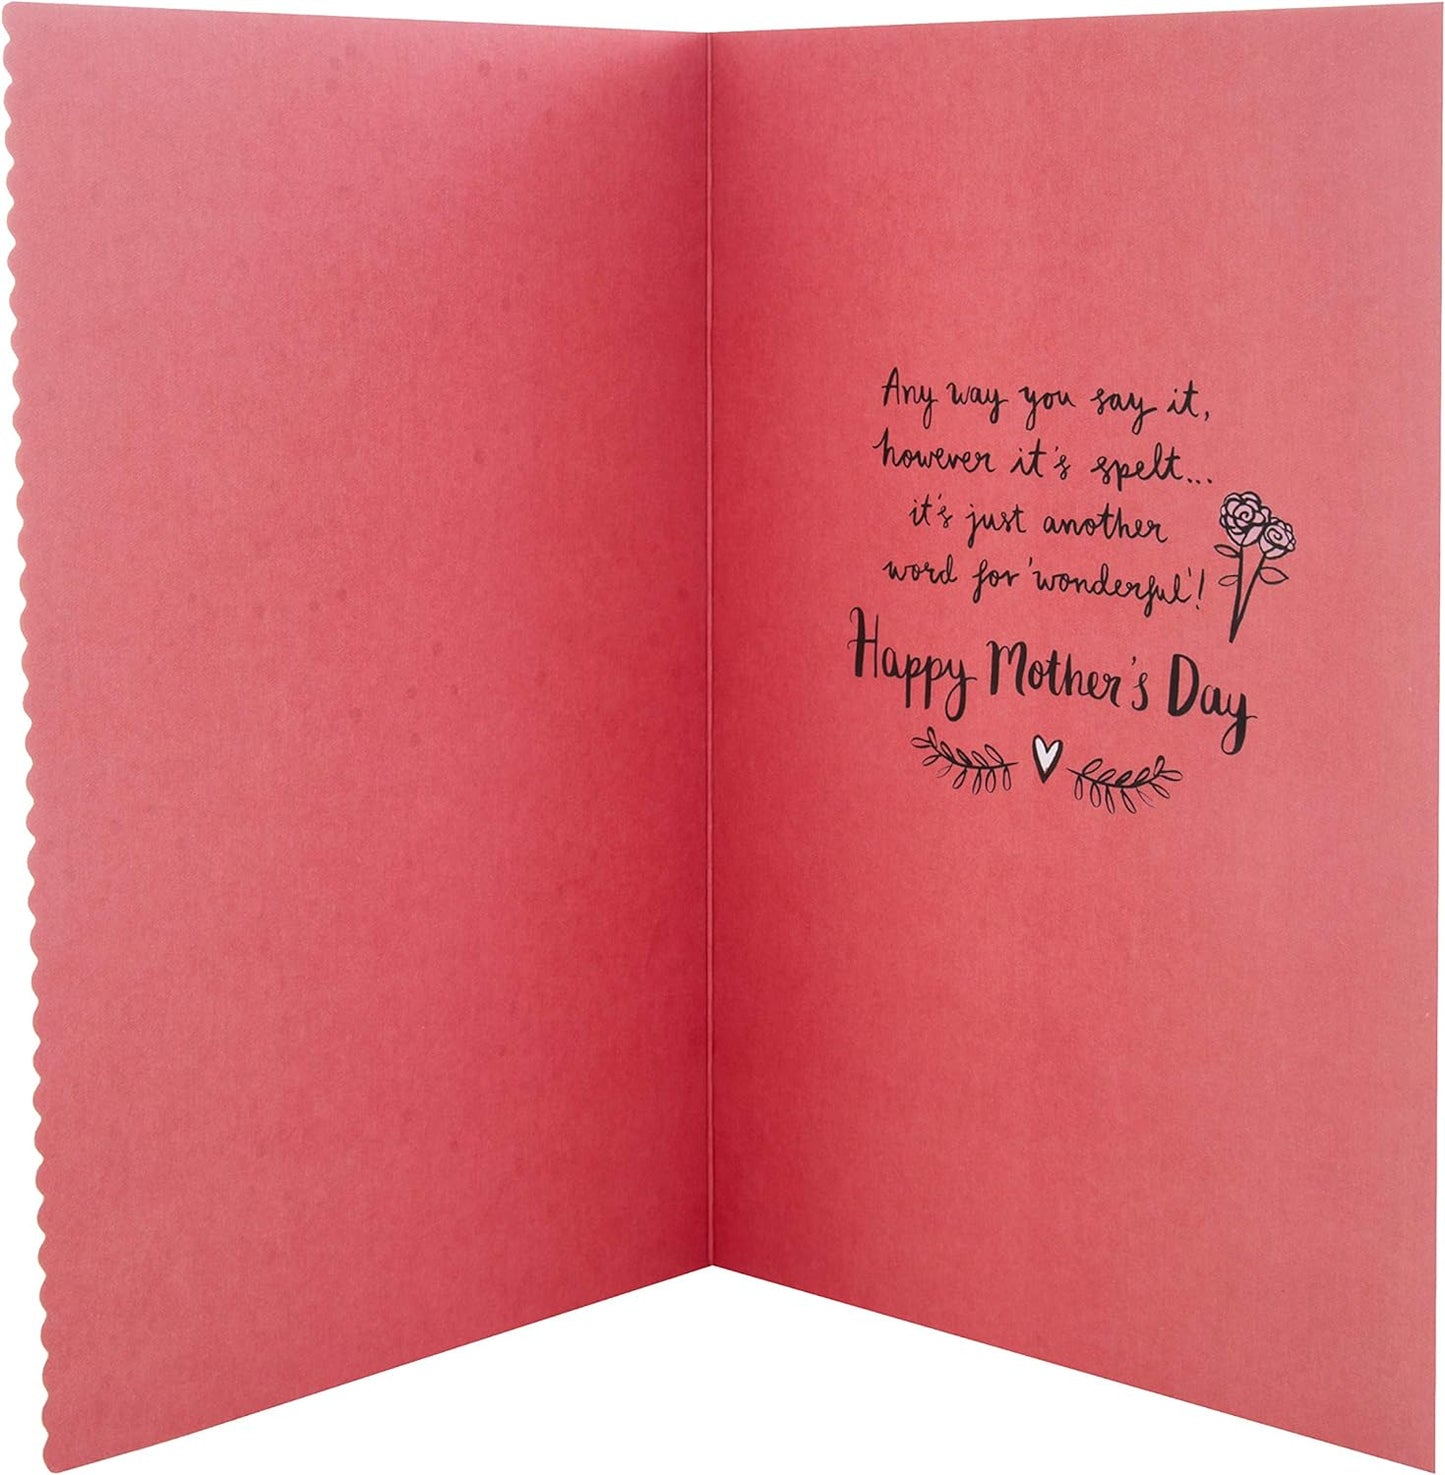 'Mum, Mother, Mama, Mammy, Mam, Mummy, Mommy, Mom, Ma' Mother's Day Card